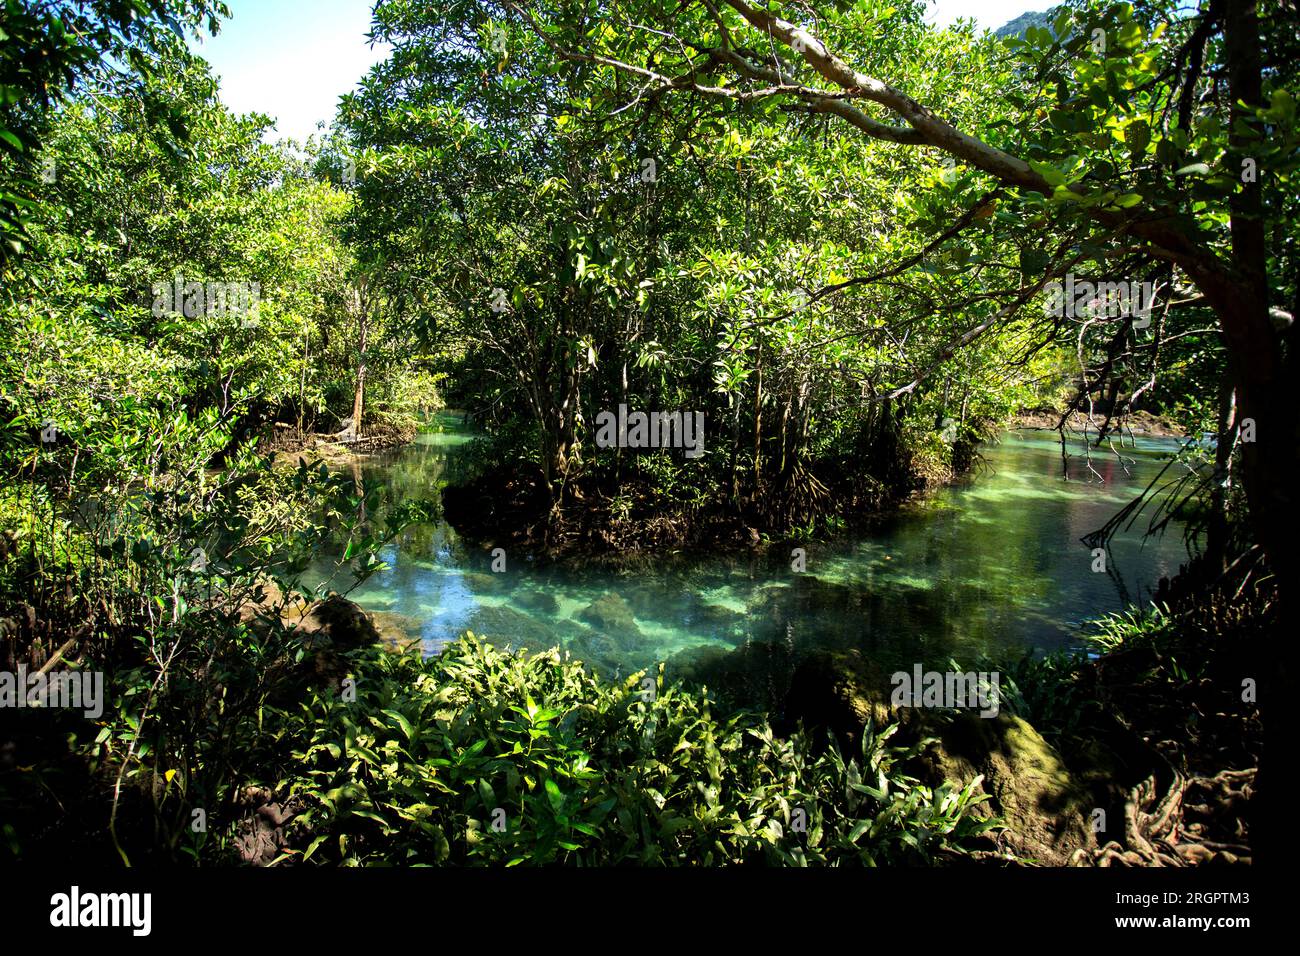 Tha Pom Mangrove Forest in Krabi Province in Thailand. Stock Photo